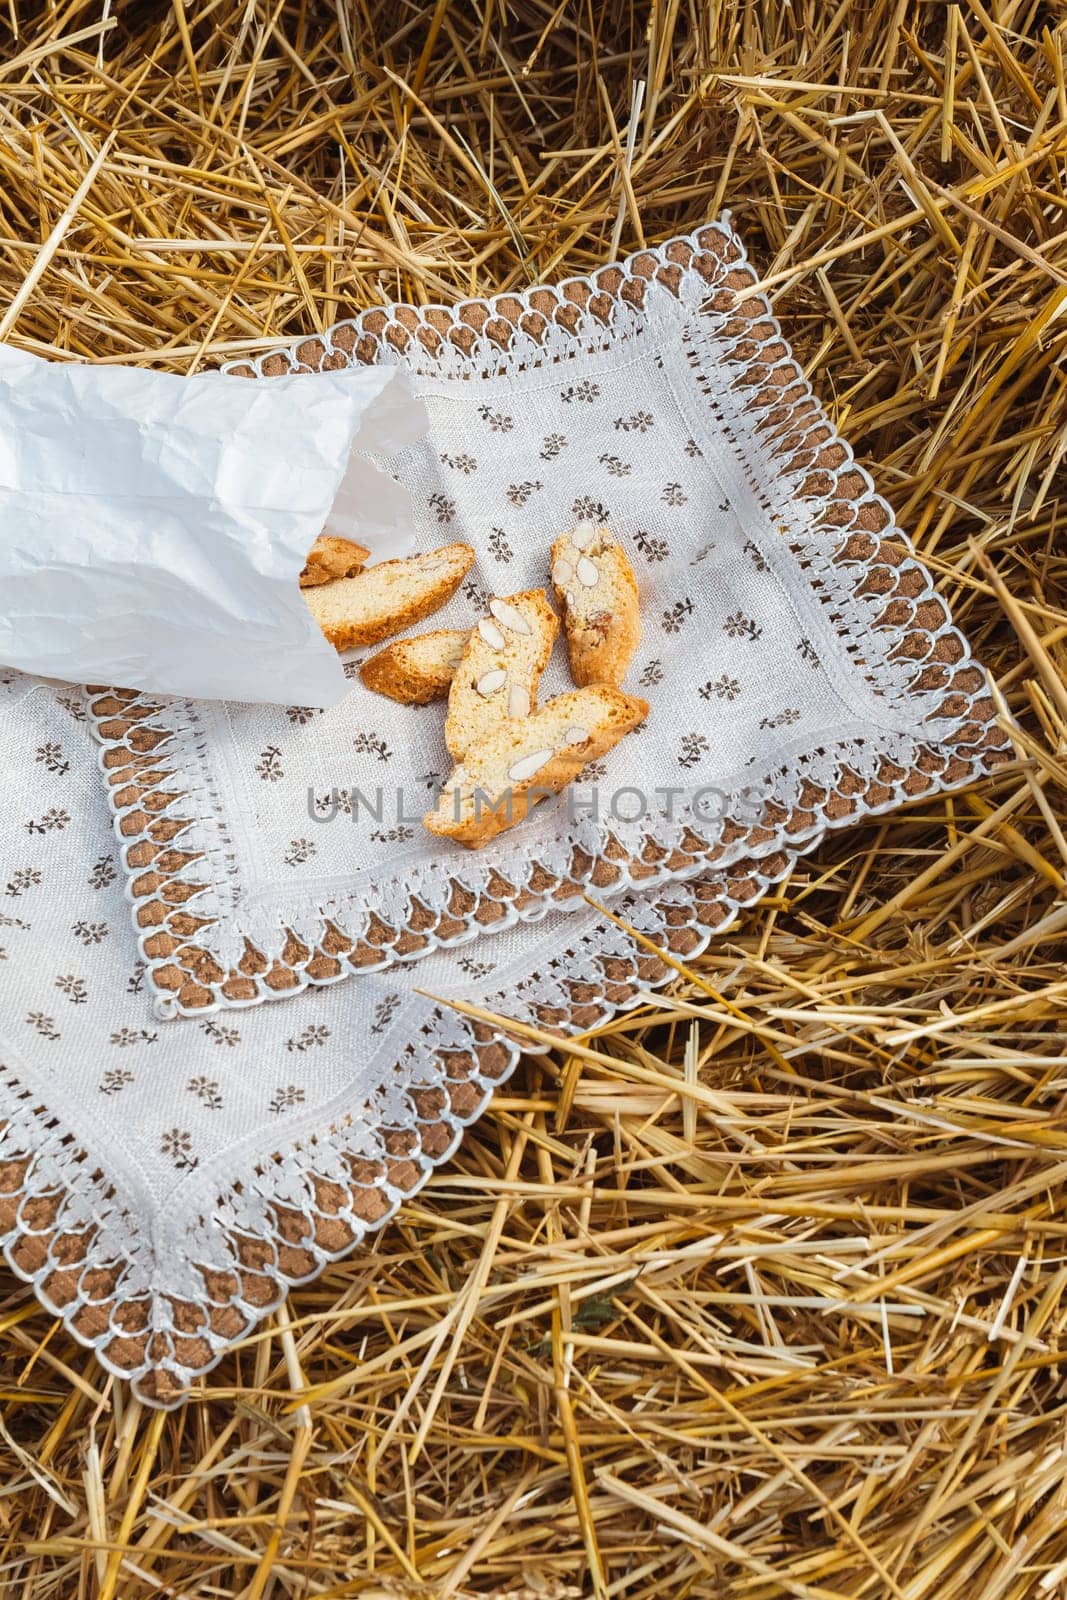 Almond cookies crackers with pieces of nuts lie on a napkin against the background of straw. A snack in nature